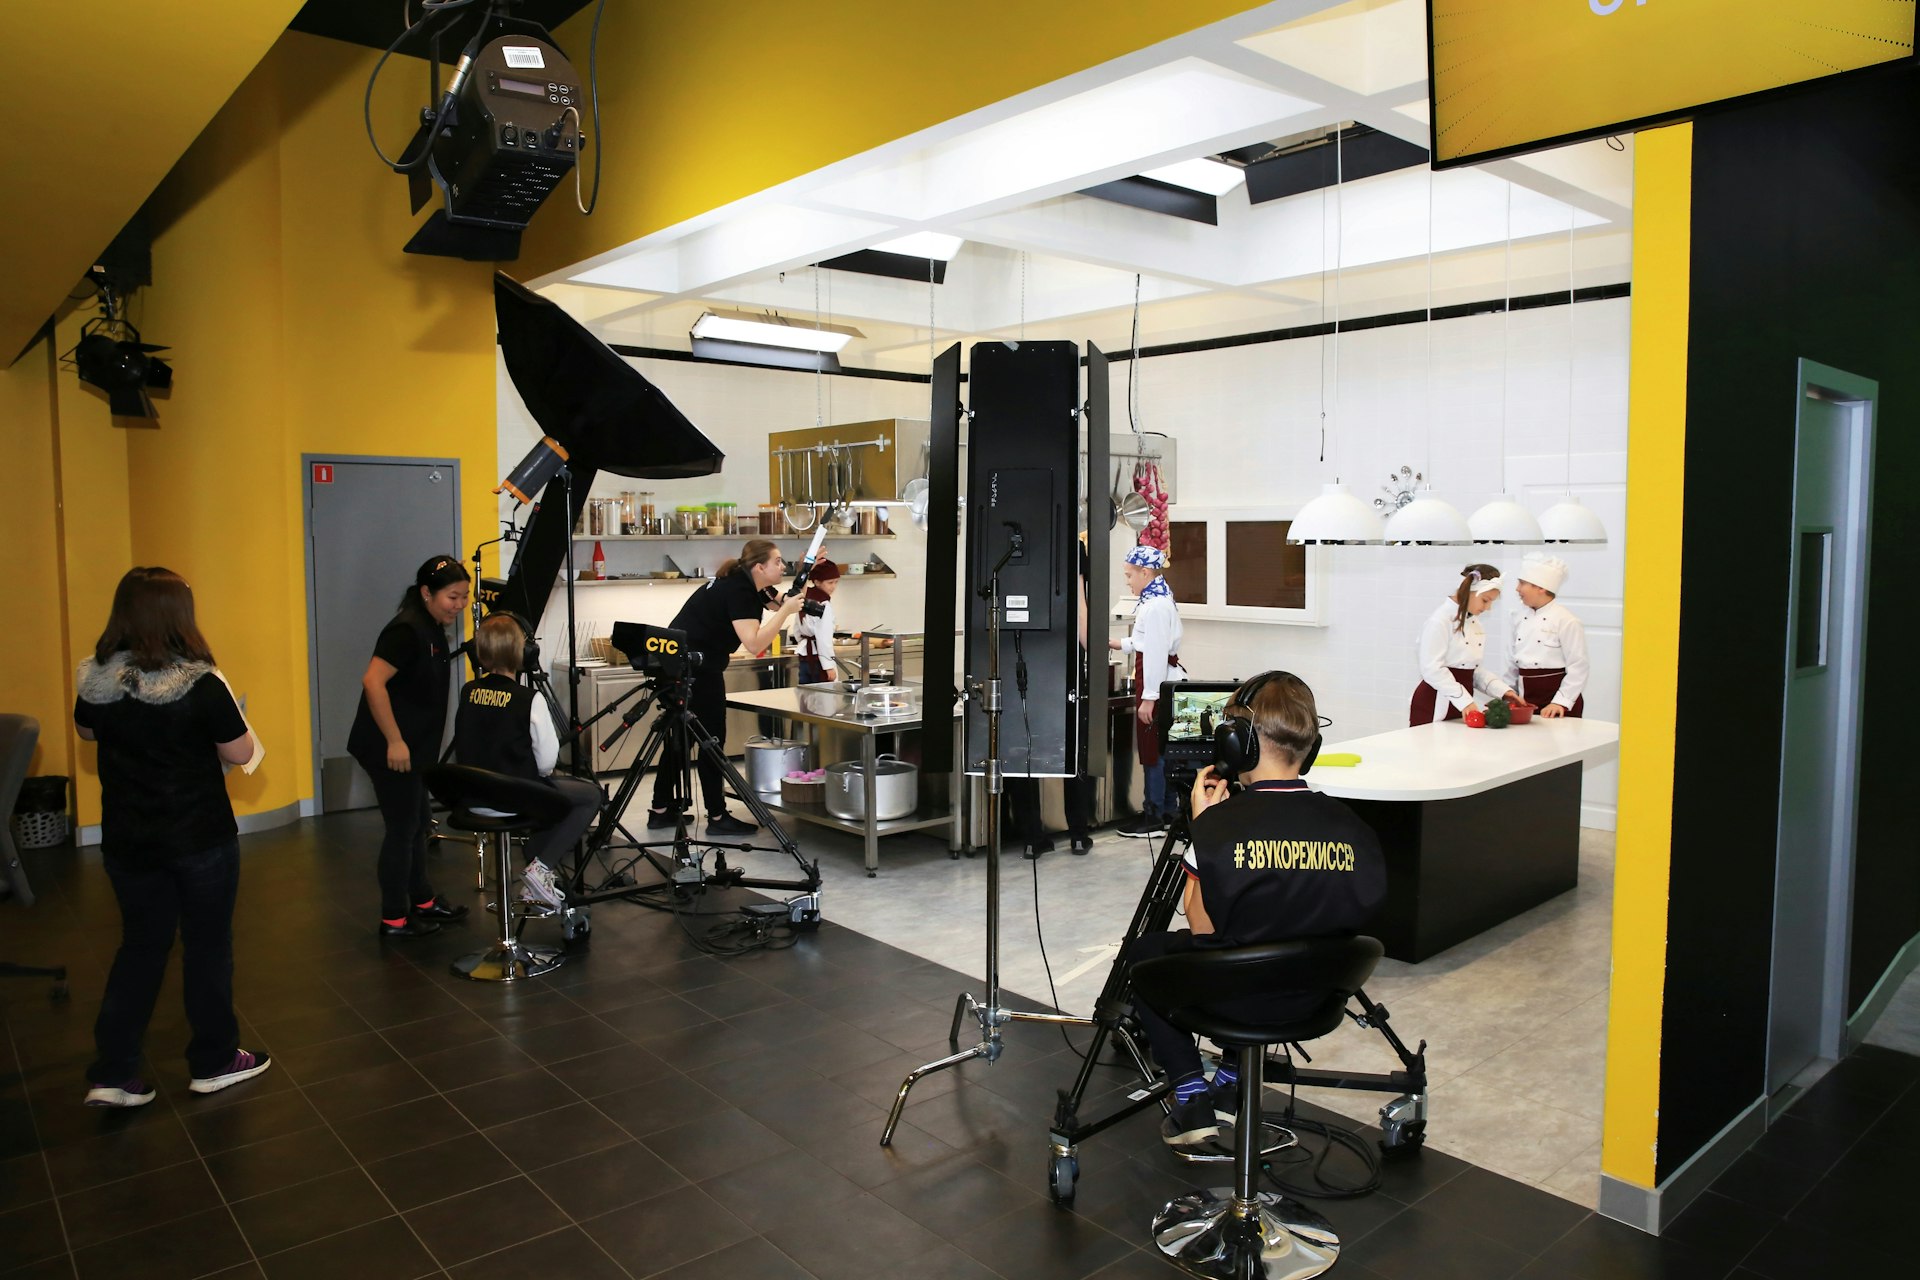 Children pretending to record a cooking TV show at KidZania, an amusement park that introduces children to the world of work in Moscow, Russia